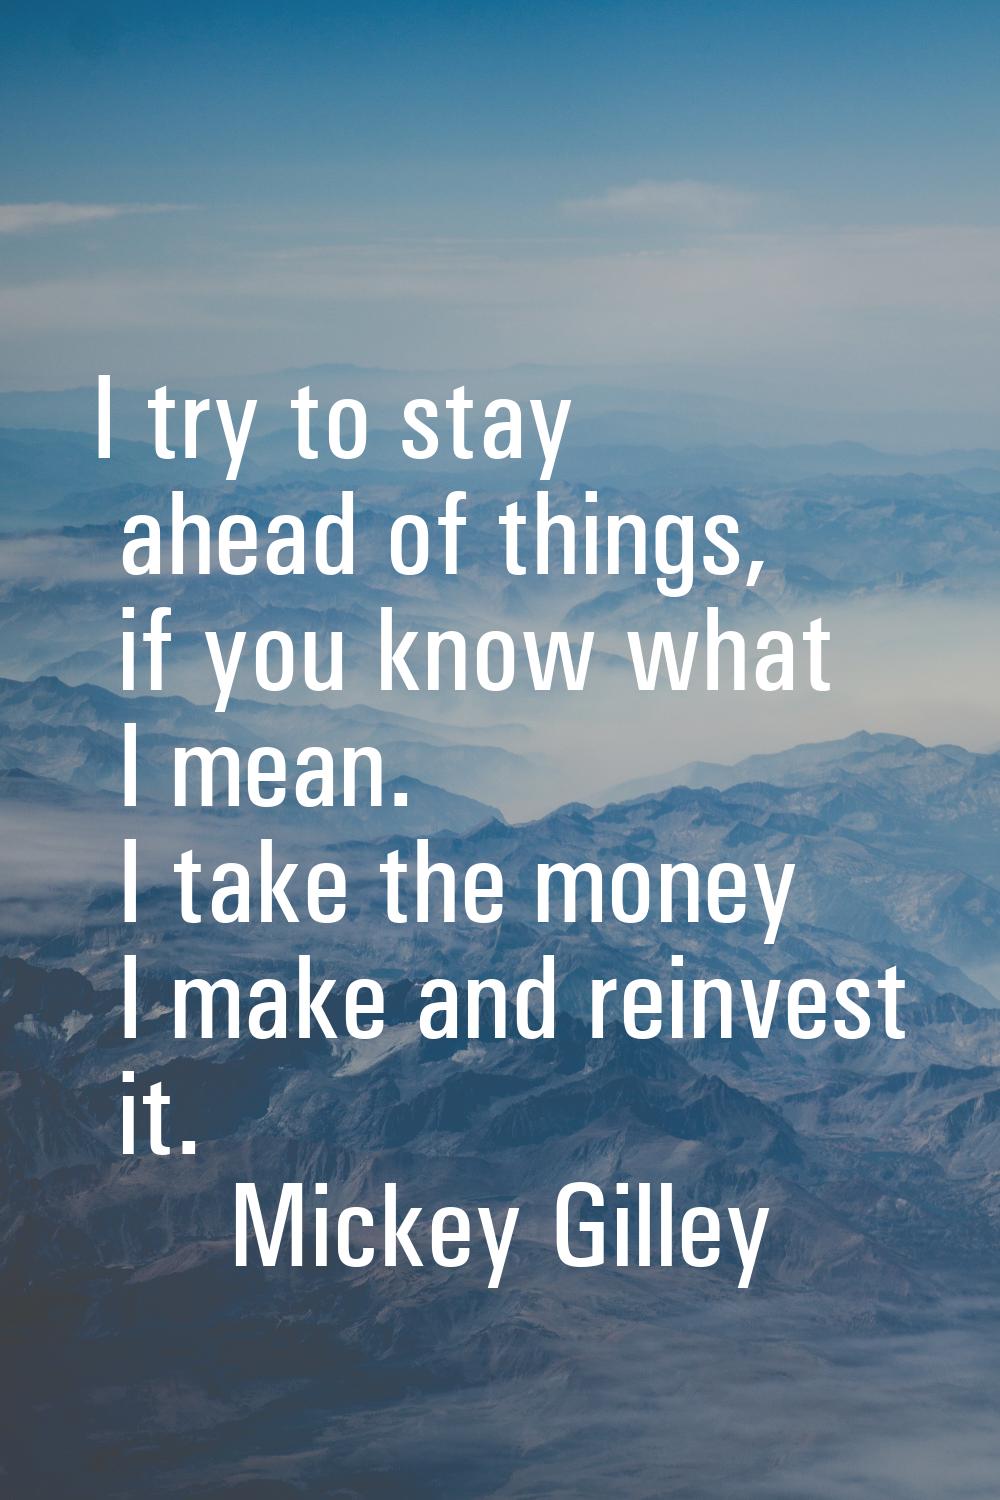 I try to stay ahead of things, if you know what I mean. I take the money I make and reinvest it.